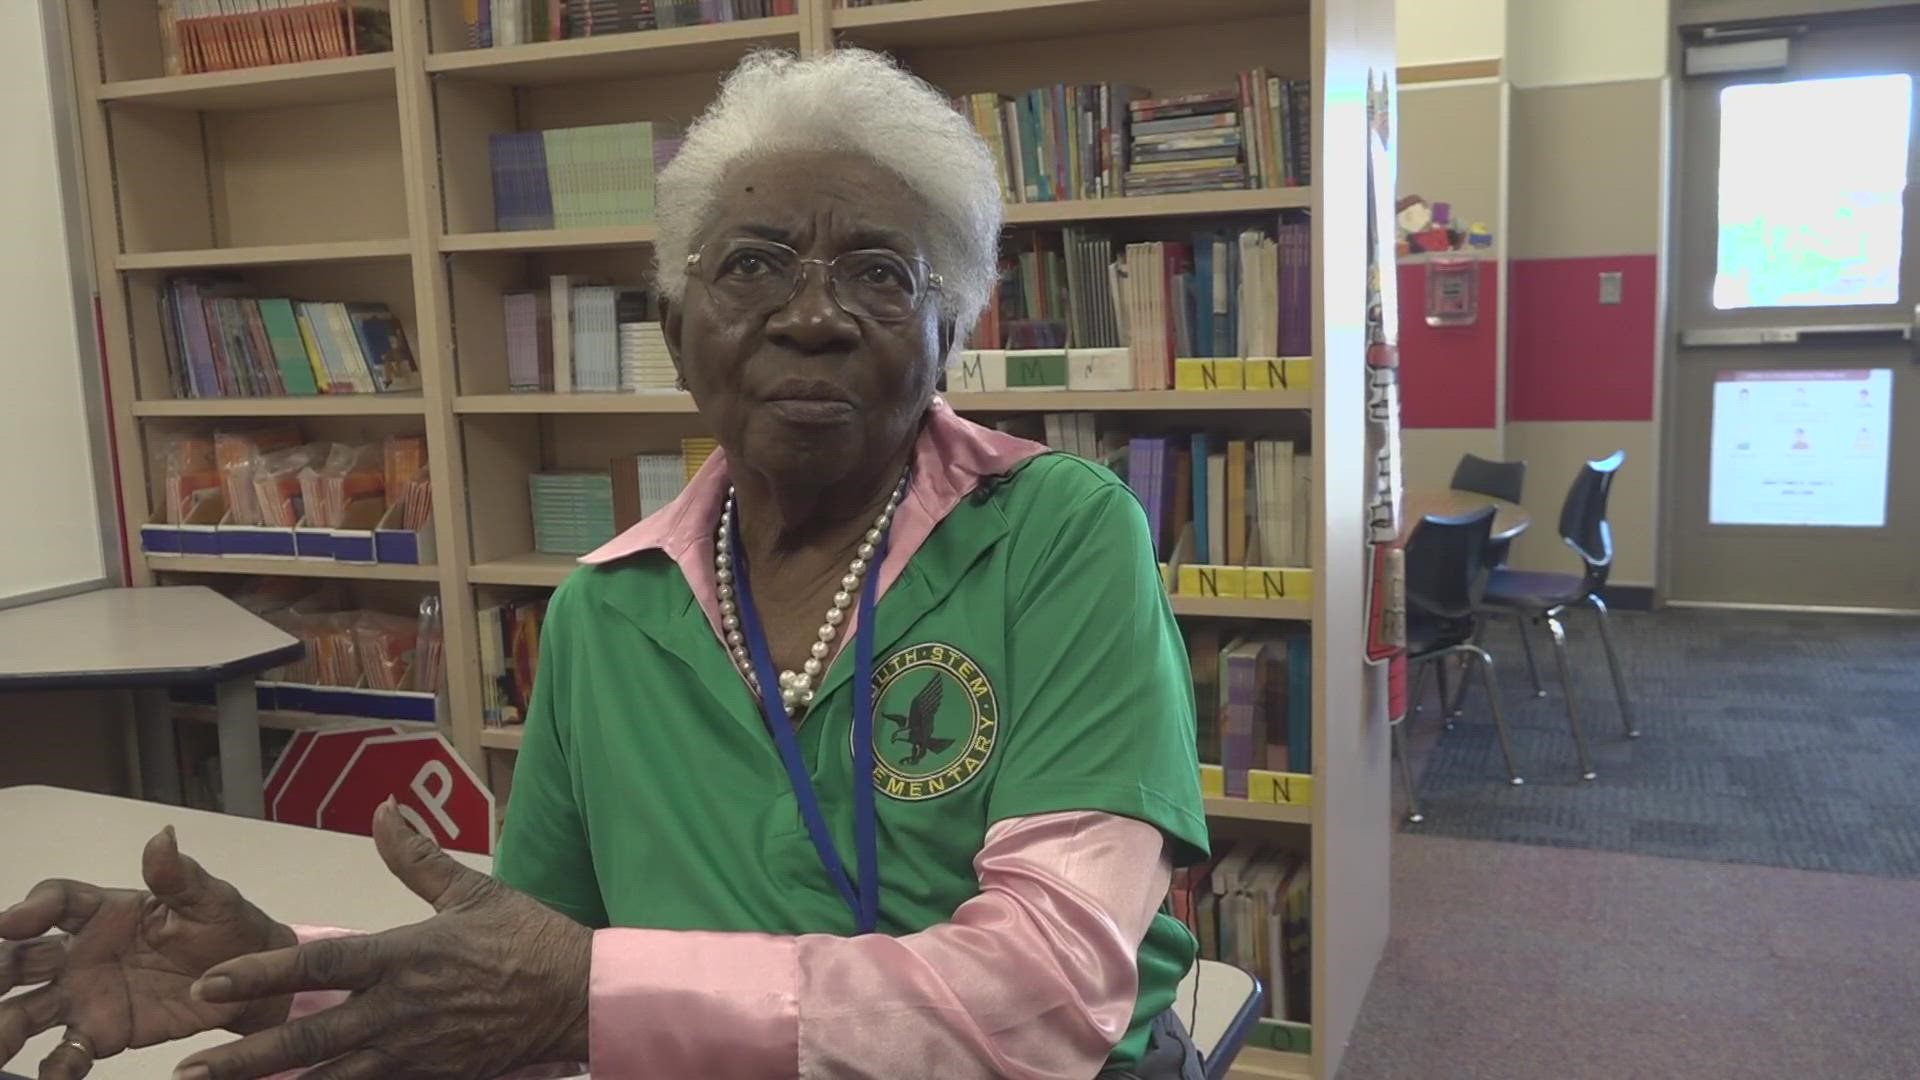 Barbara Yarbrough started teaching in Midland schools since 1959. She's not only taught core school subjects to students but also lessons to last them a lifetime.